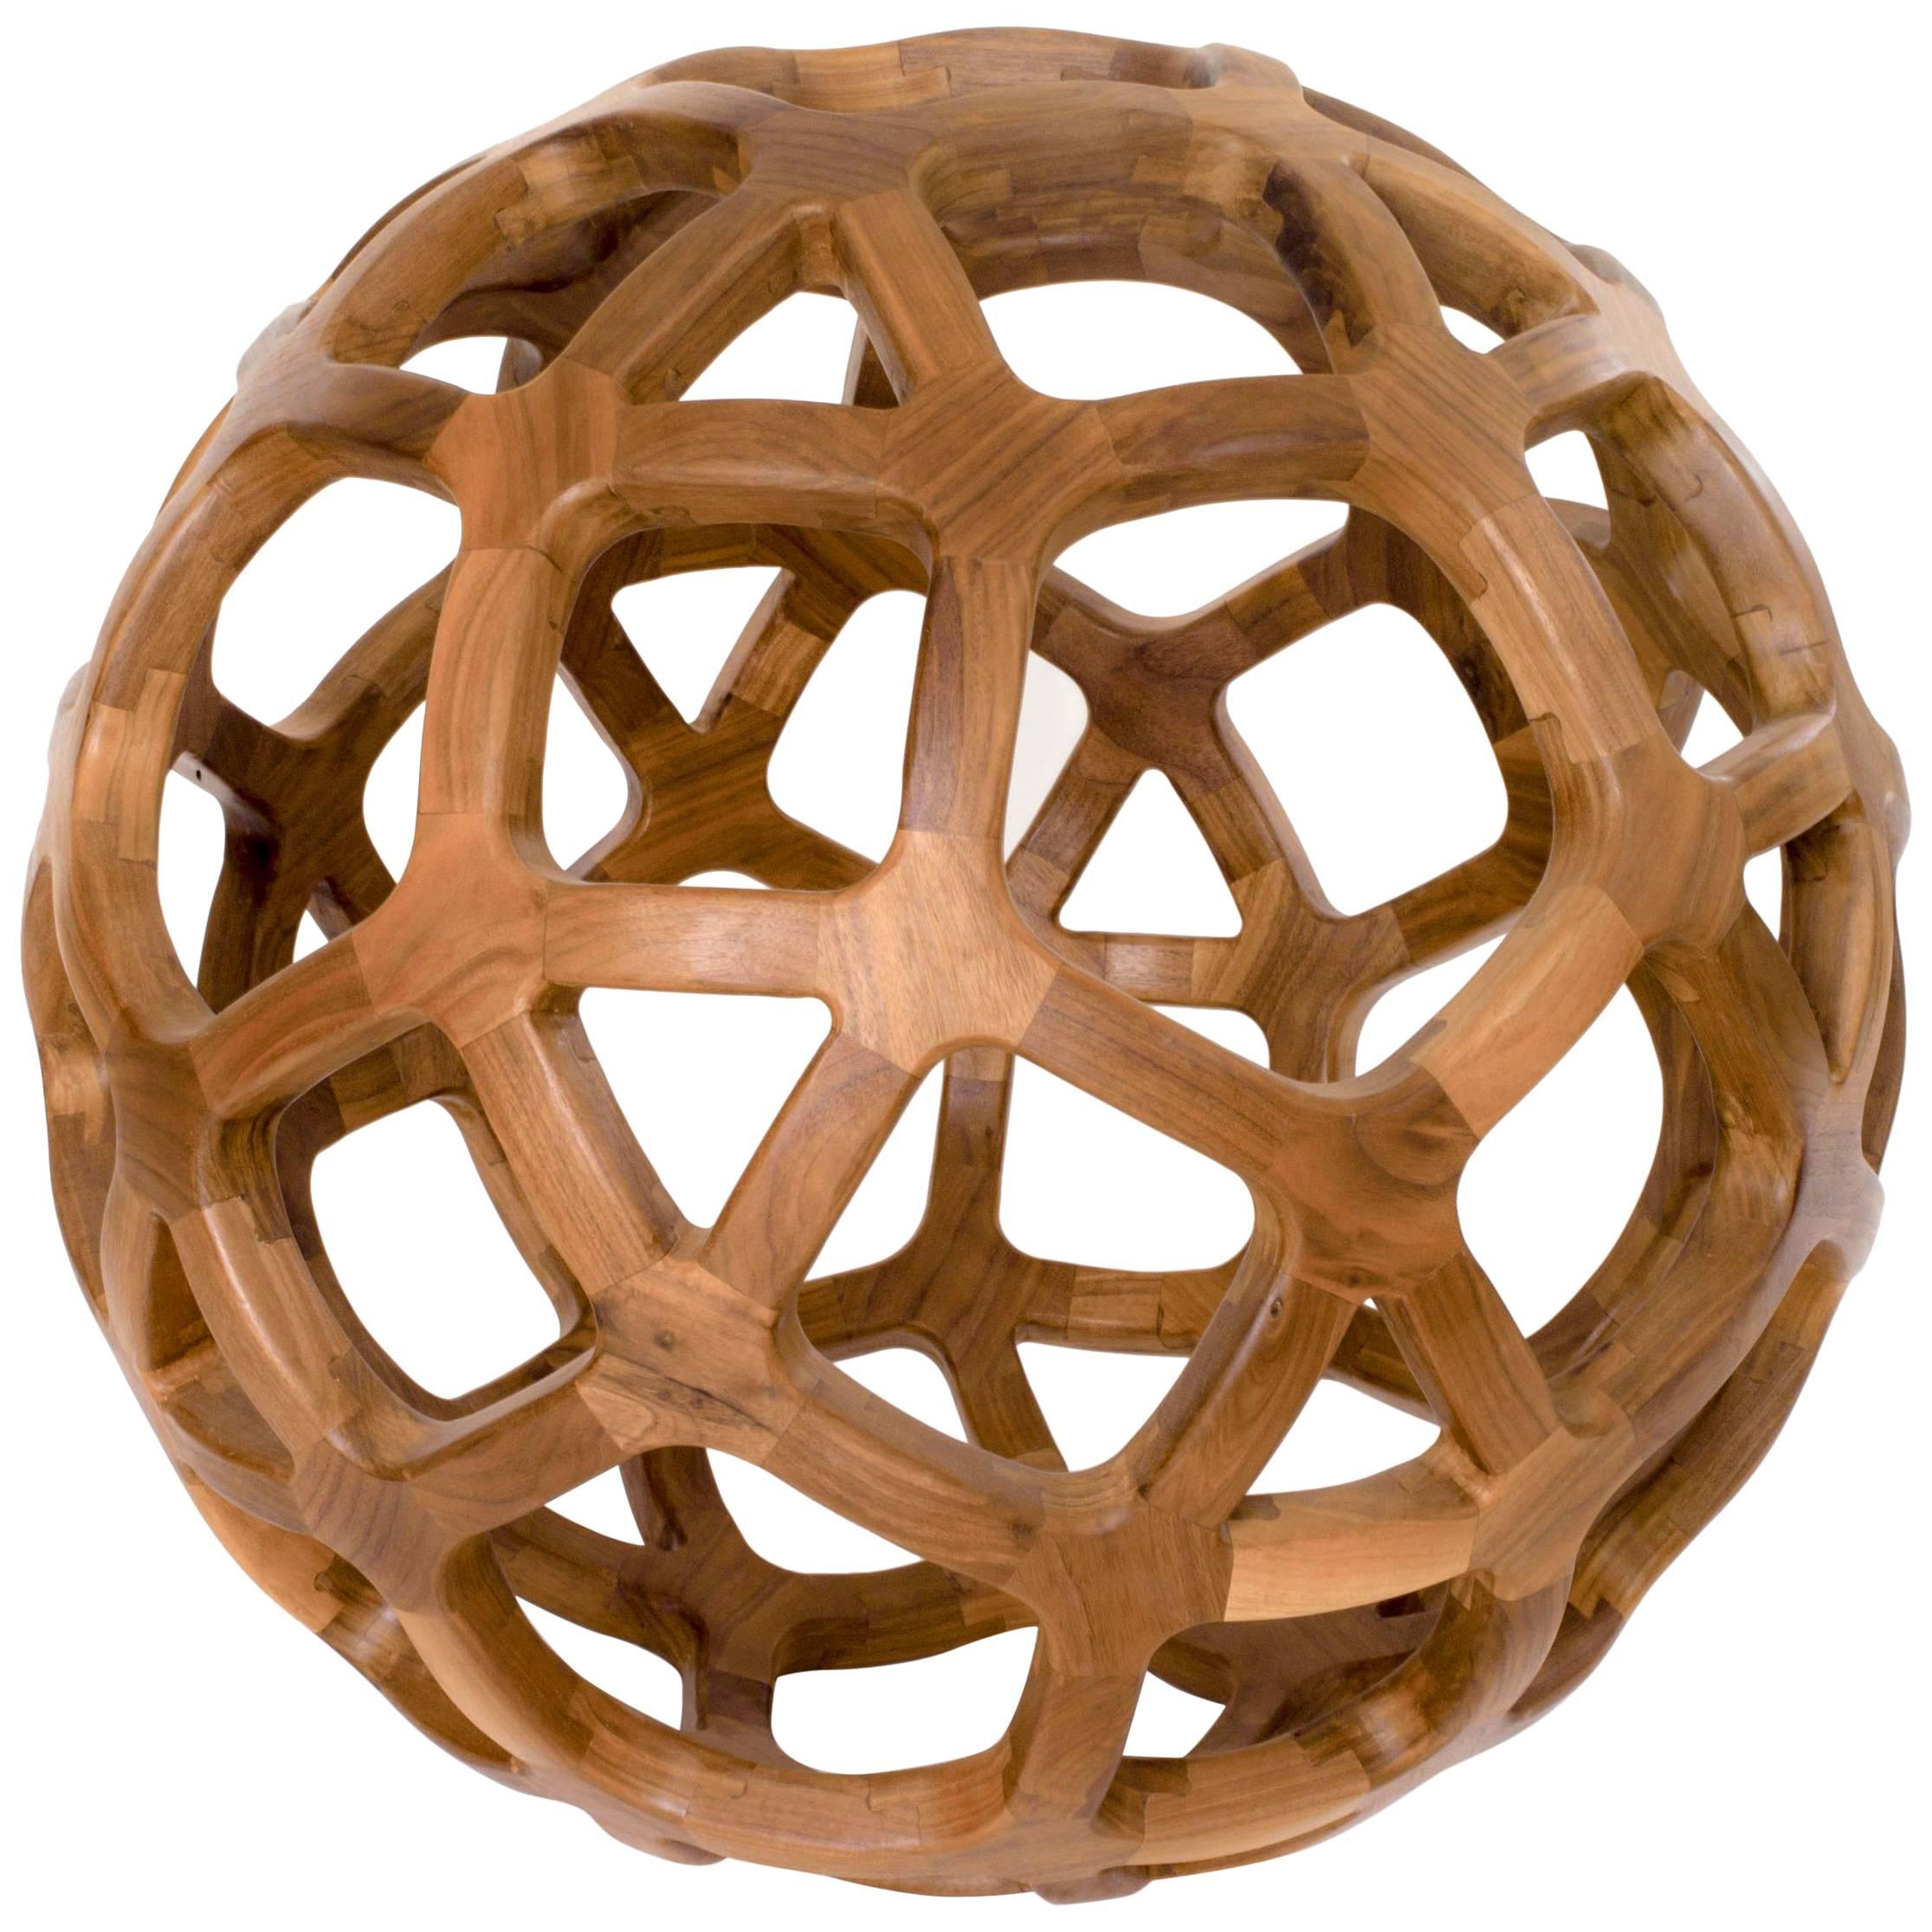 Contemporary Mexican Handcrafted Geometric Archimedean Sphere Walnut Sculpture For Sale